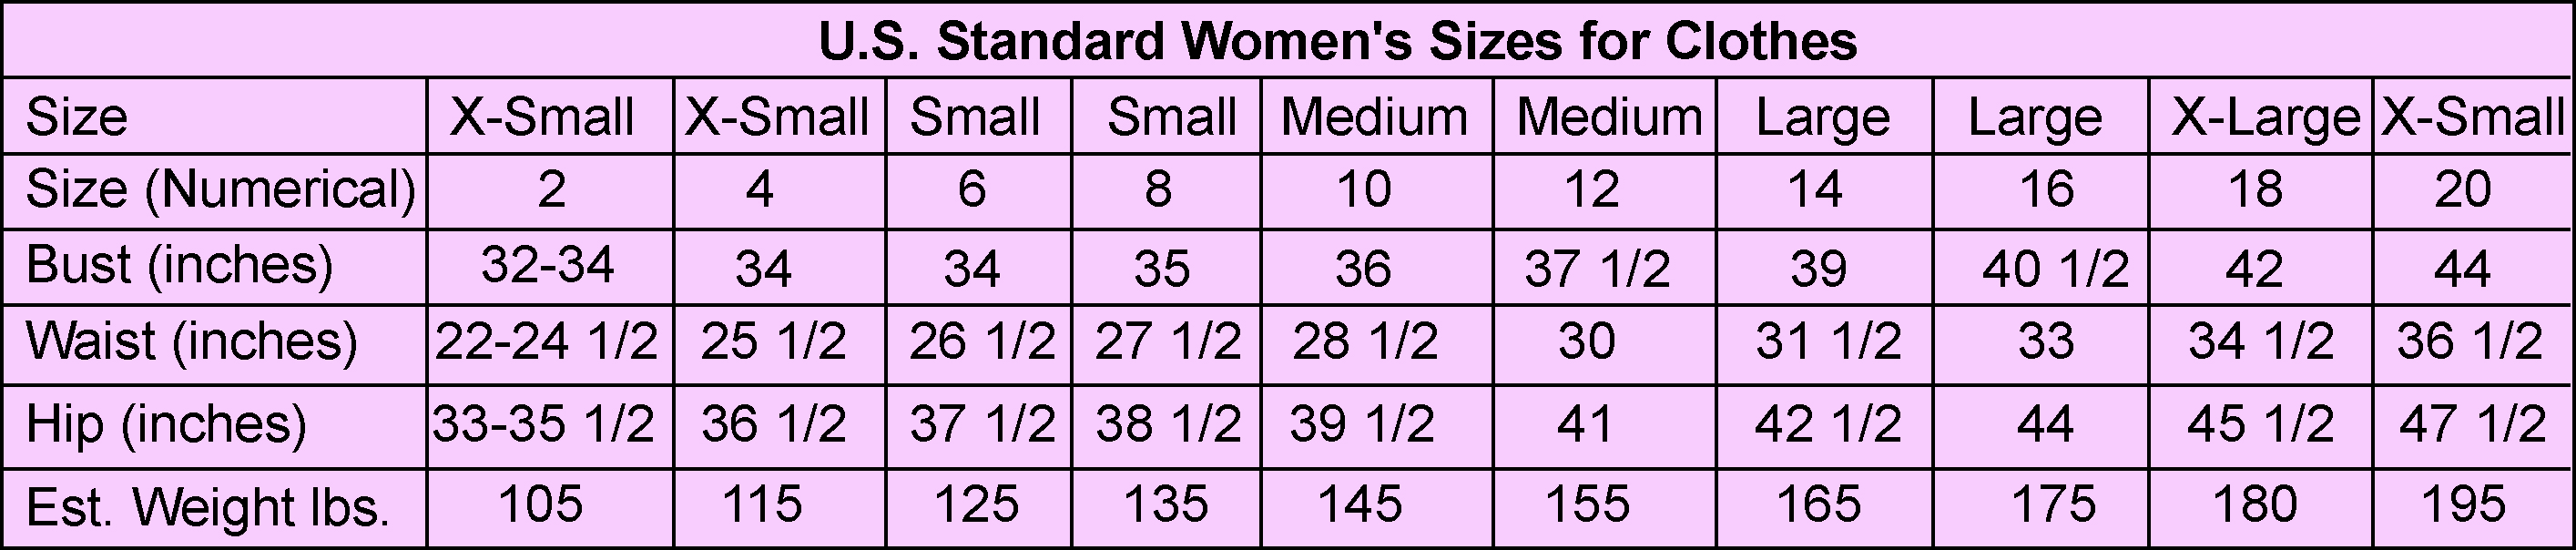 Women's size chart for clothes.